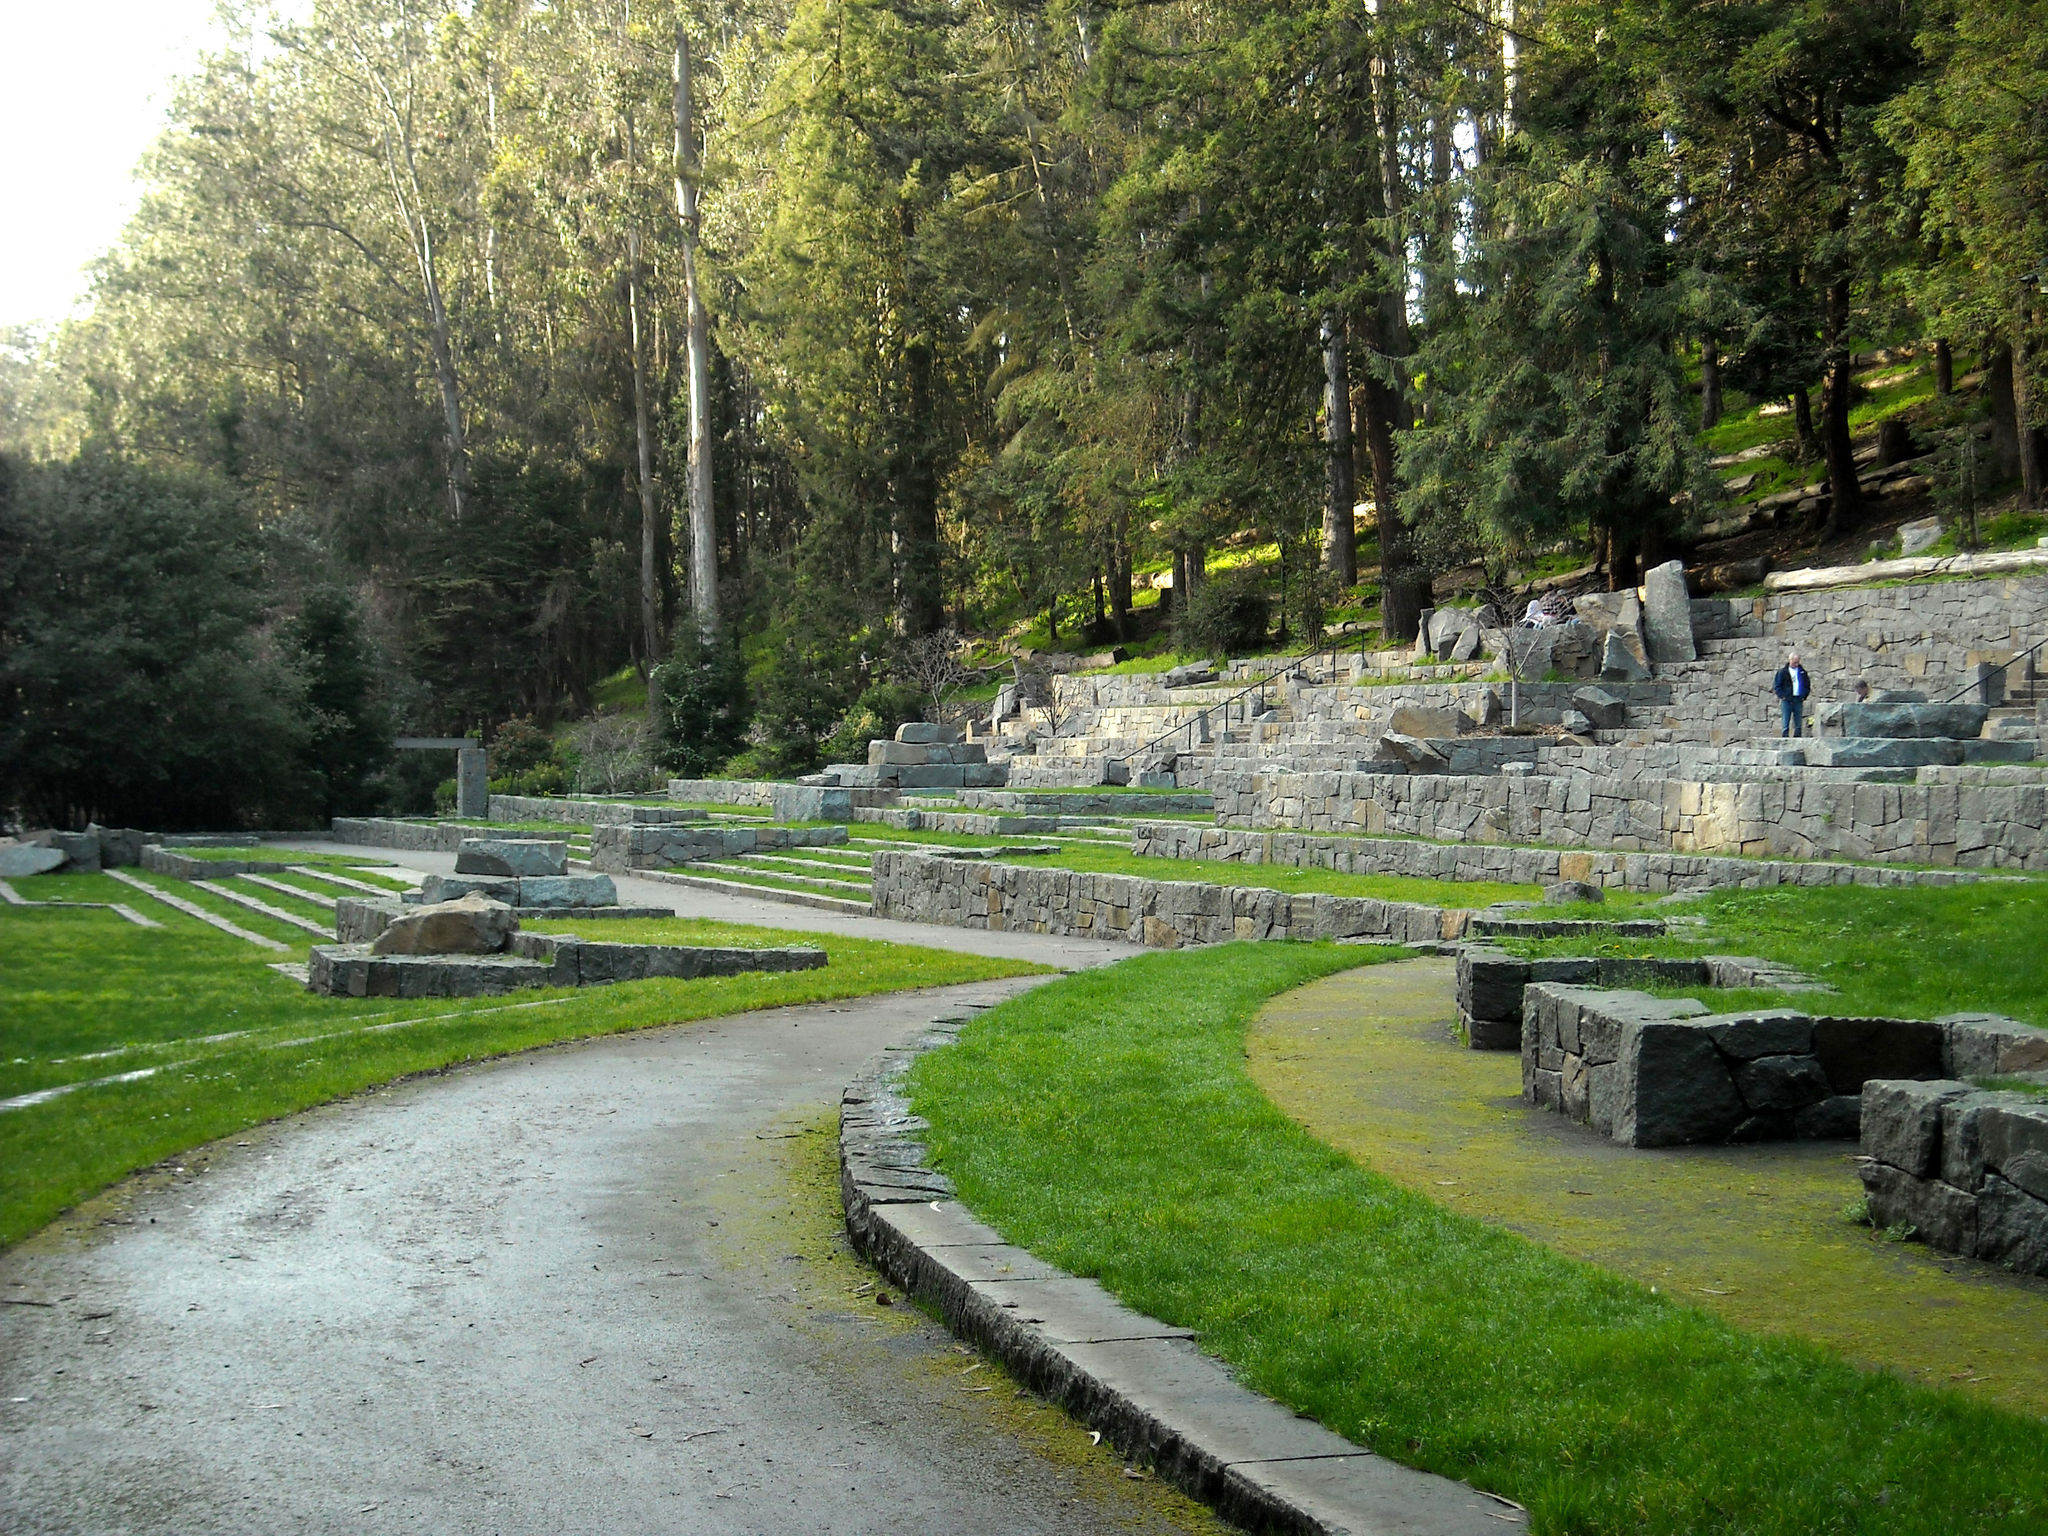 A shot of the seating at Stern Grove.